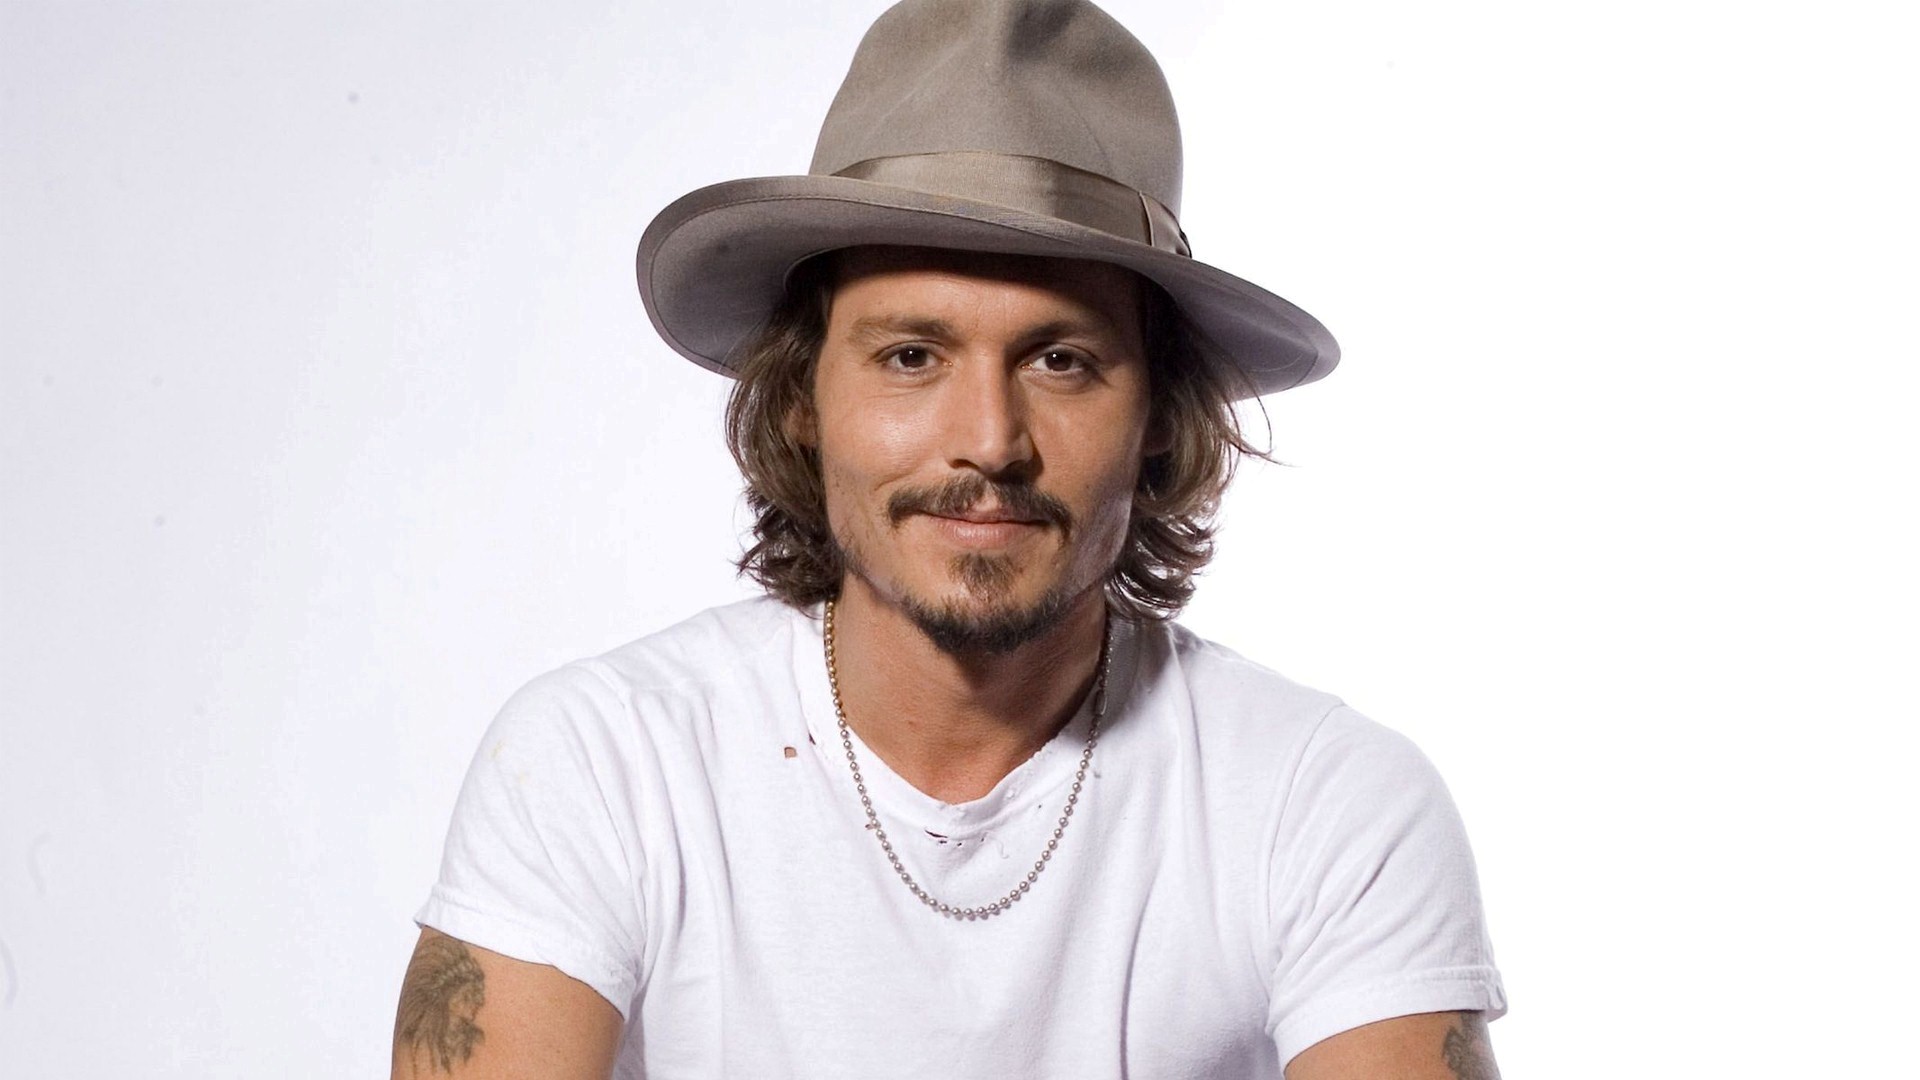 Johnny Depp Wallpapers High Quality - Cute Hollywood Handsome Actors - HD Wallpaper 